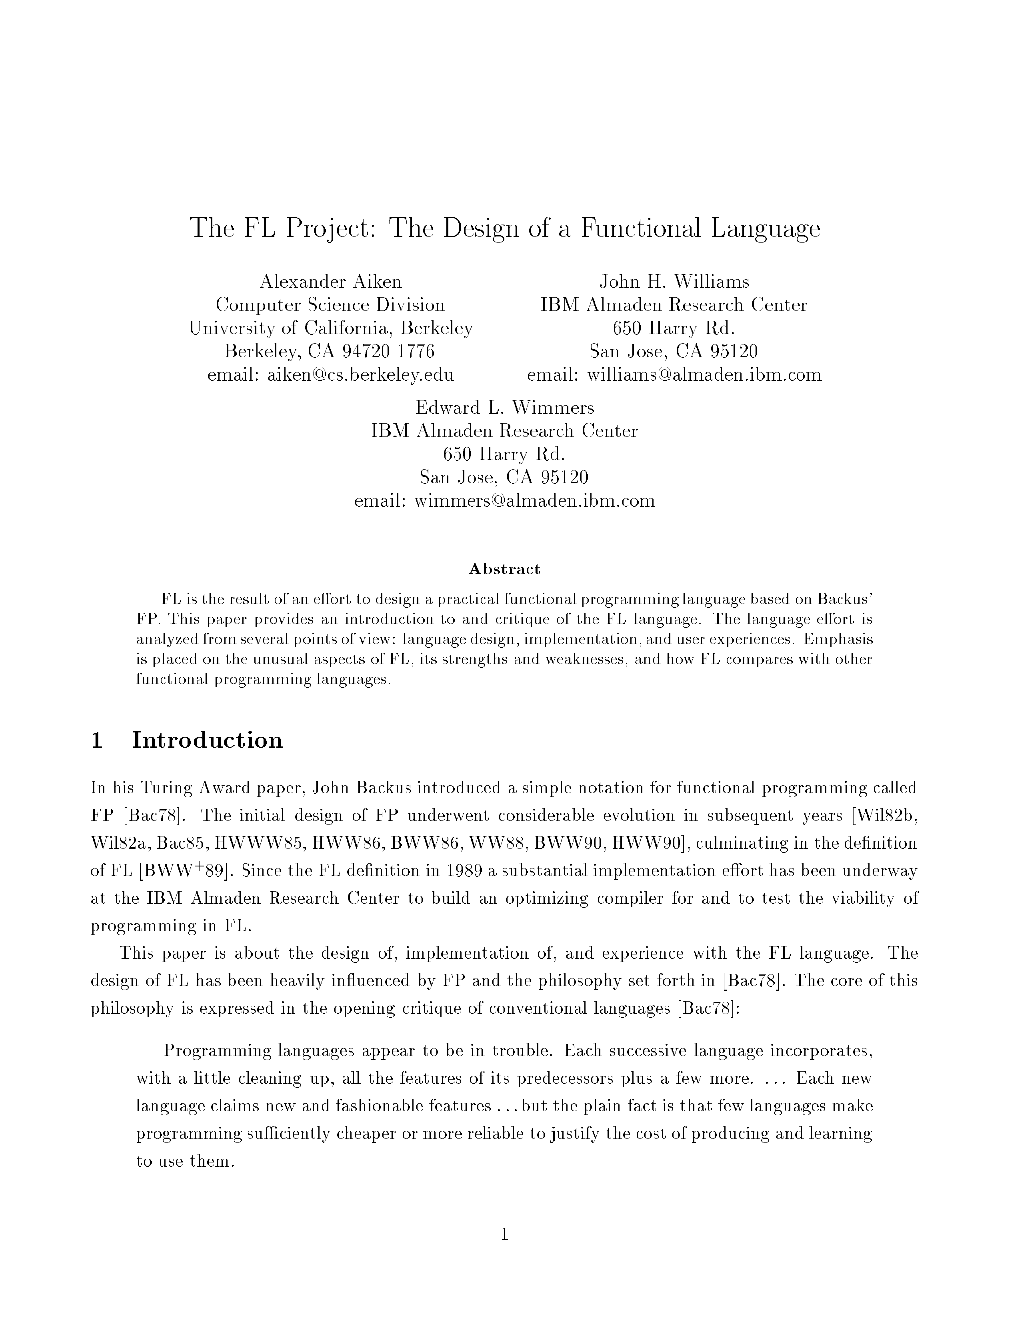 The FL Project: the Design of a Functional Language 1 Introduction